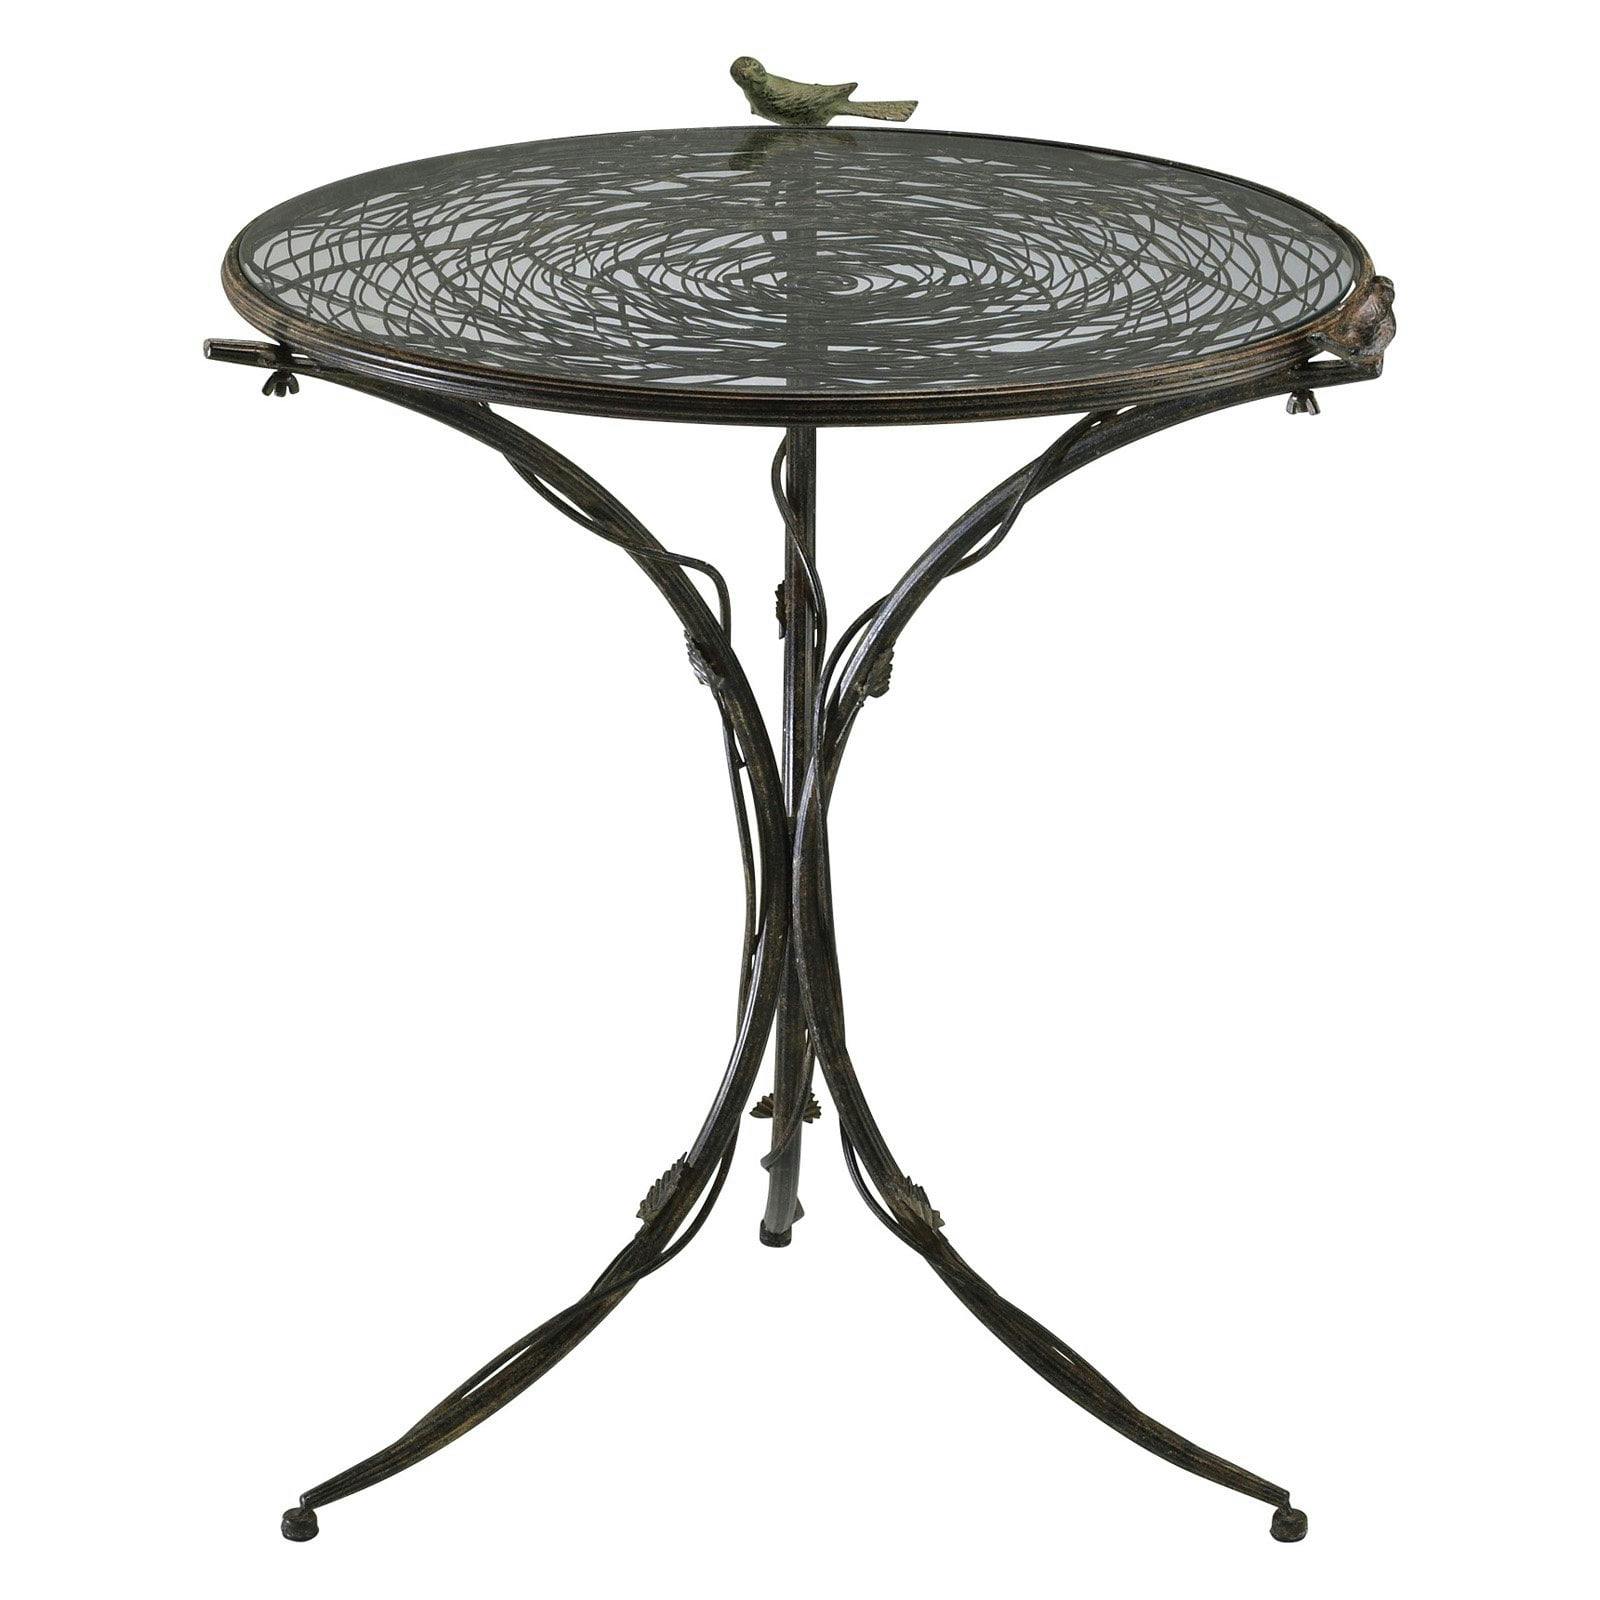 Elegant Rust-Finished Round Glass Top Dining Table with Bird Base